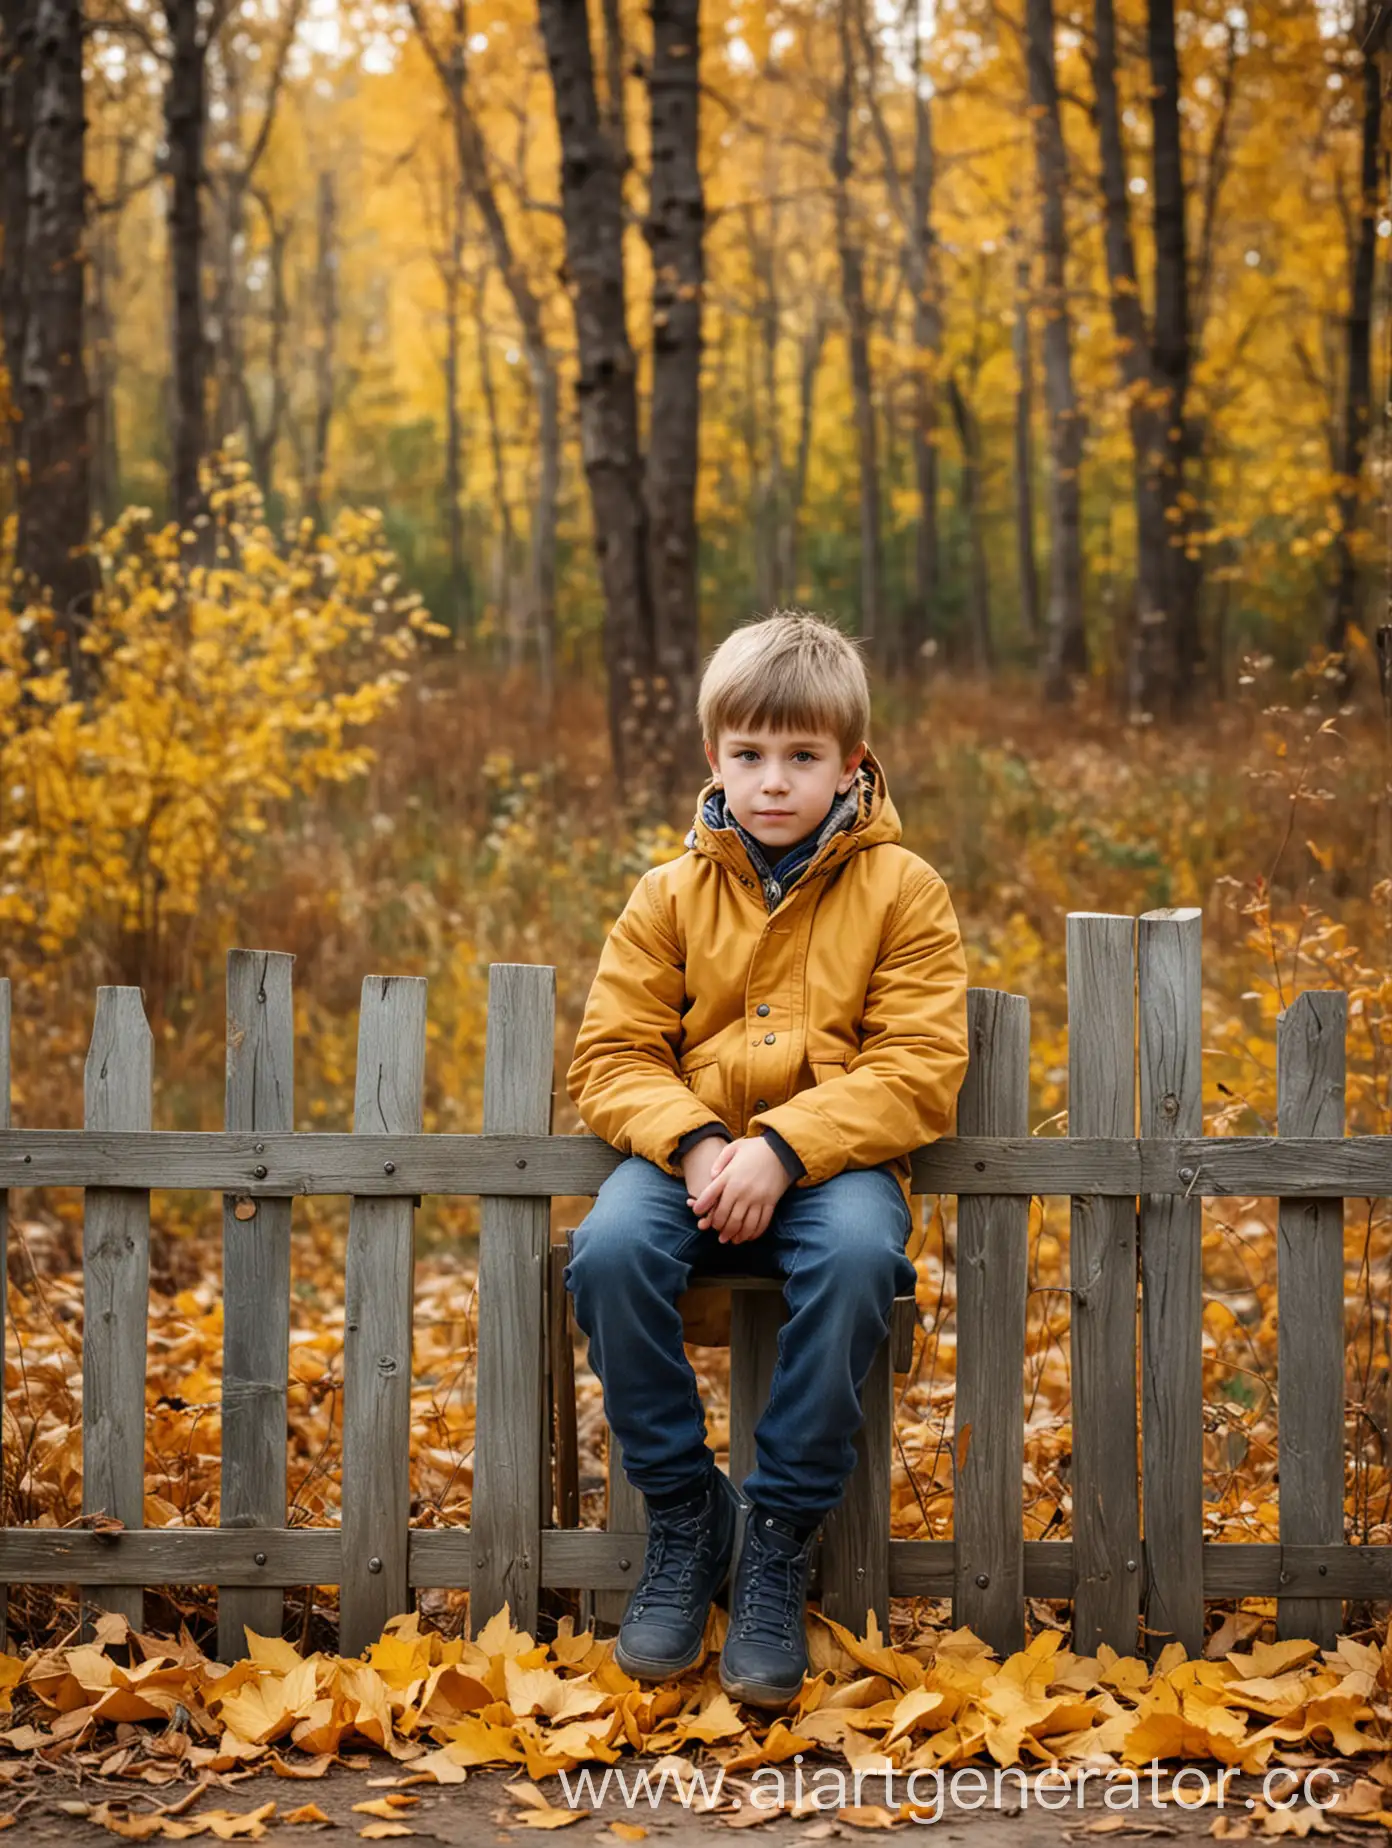 Boy-Sitting-on-Wooden-Fence-in-Autumn-Forest